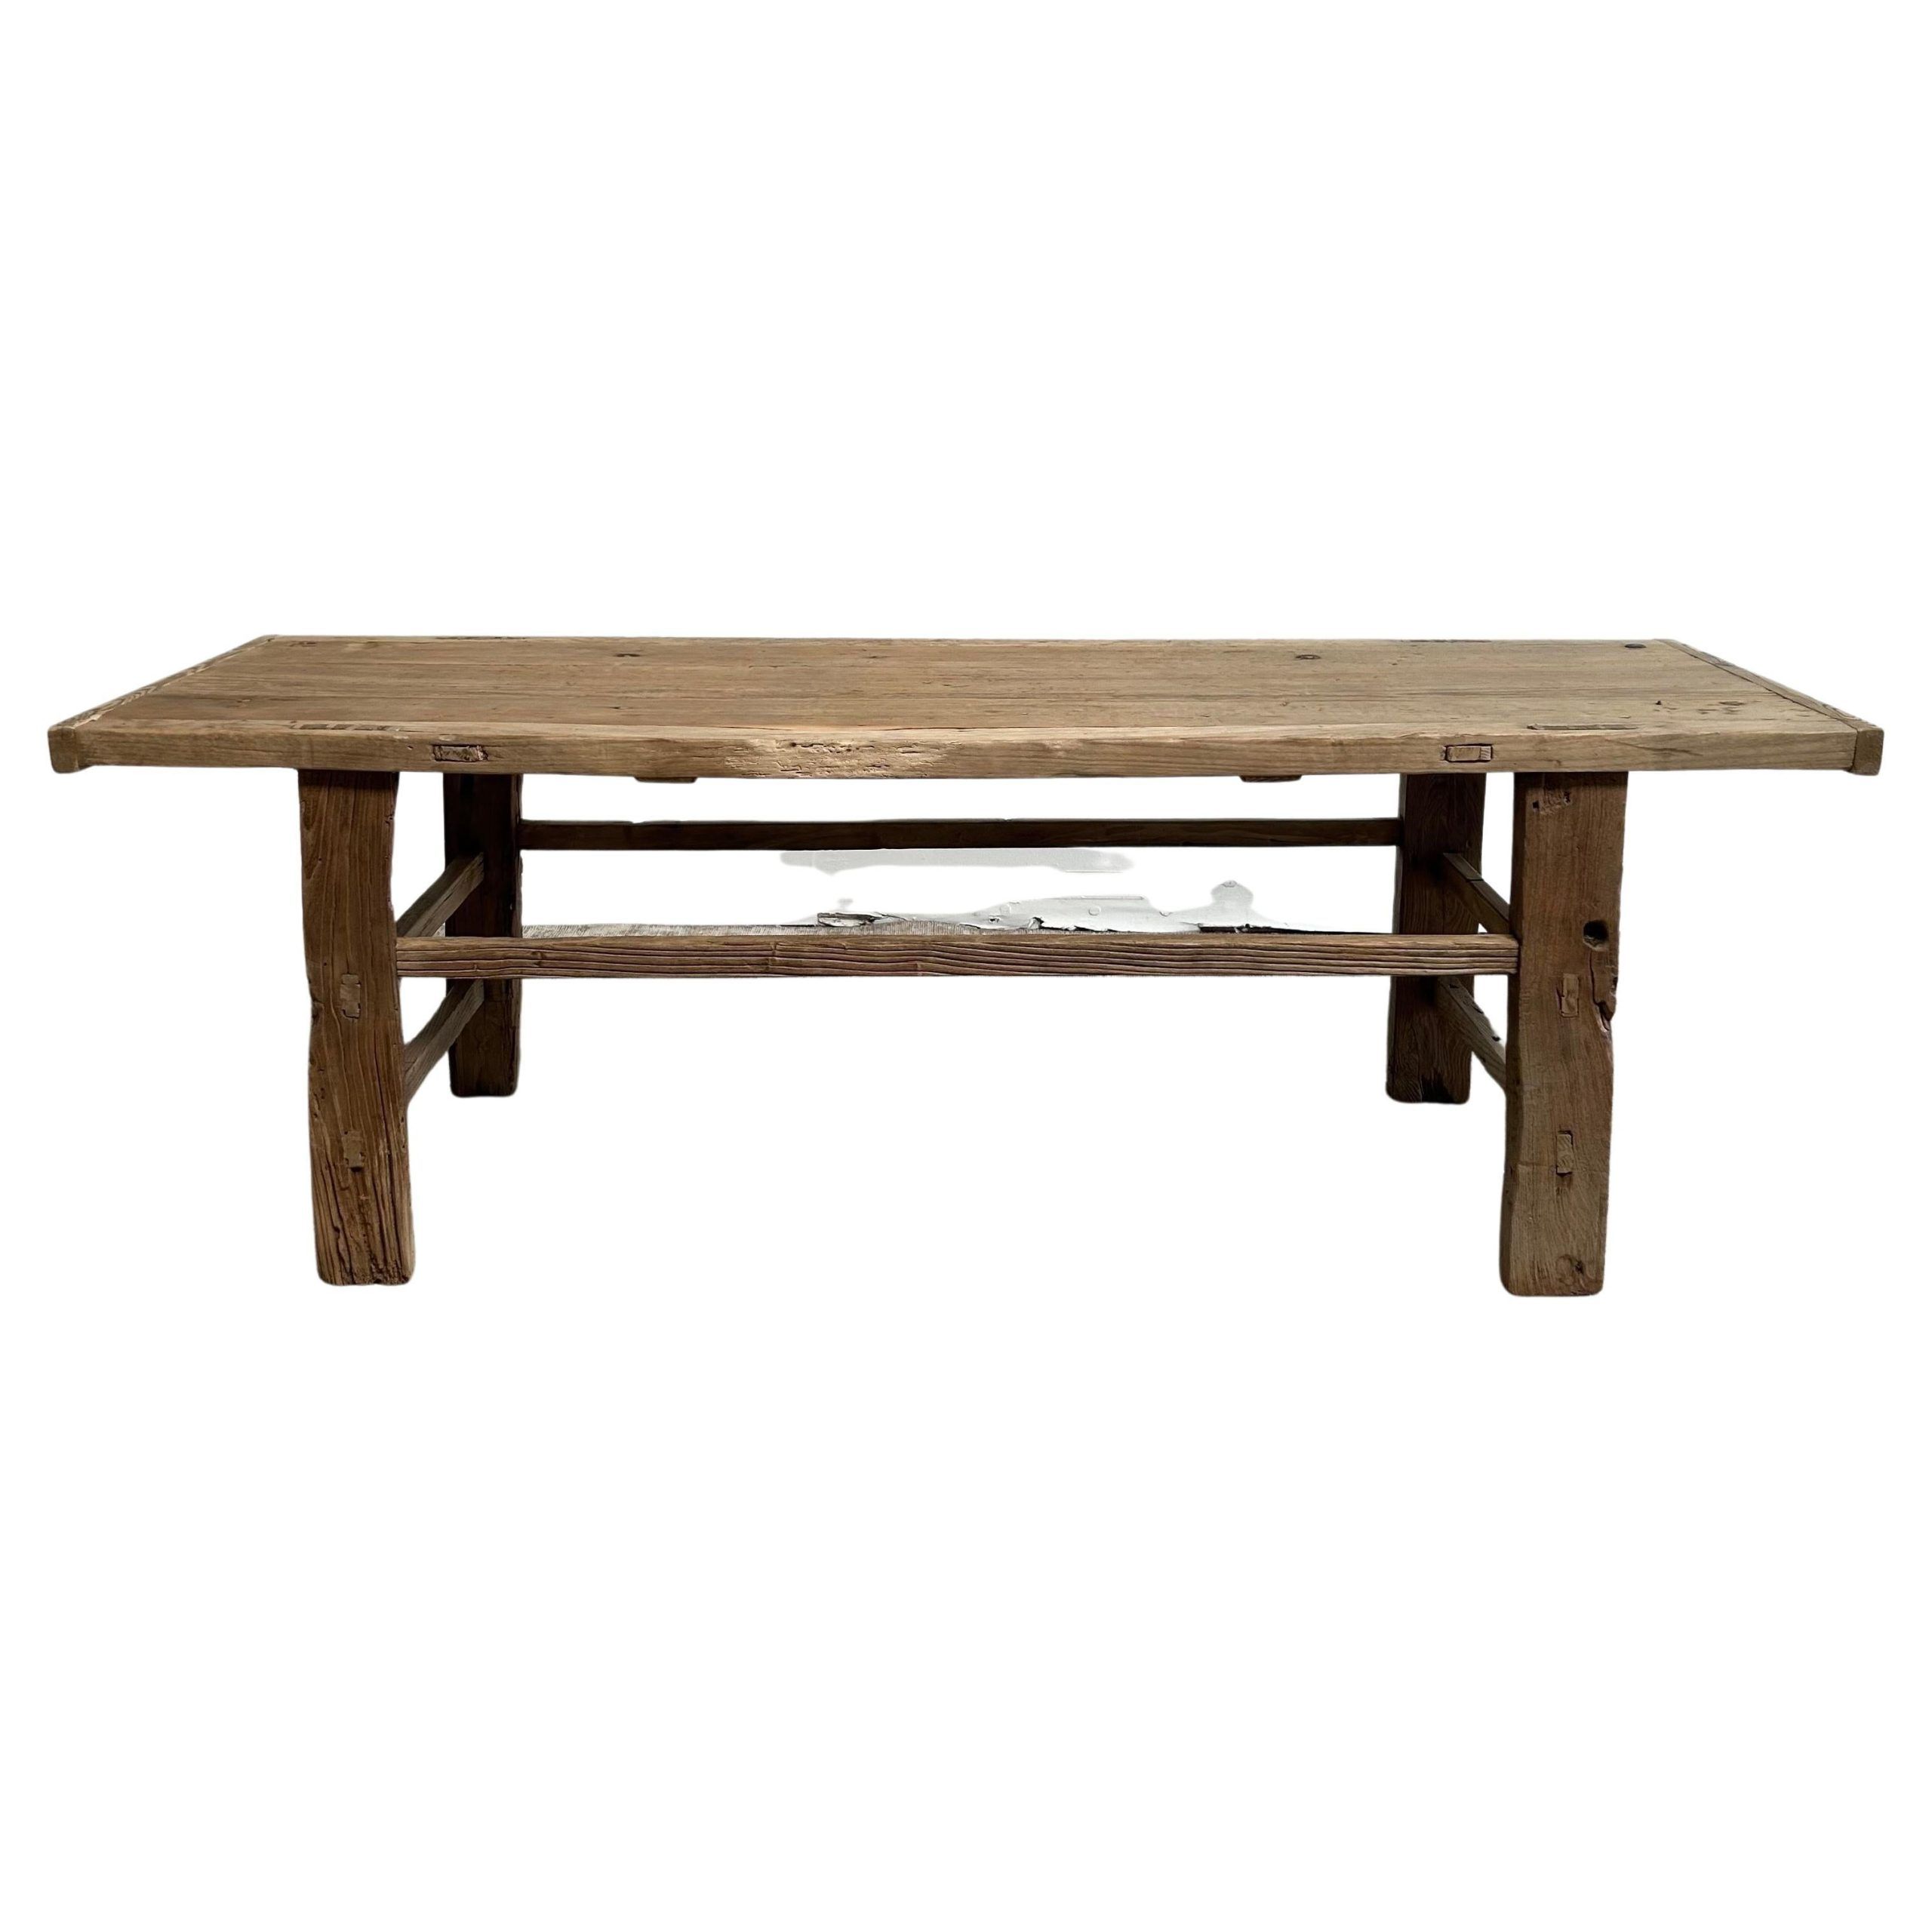 Vintage Reclaimed Elm Wood Coffee Table At 1stdibs With Regard To Pemberly Row Replicated Wood Coffee Tables (Gallery 18 of 20)